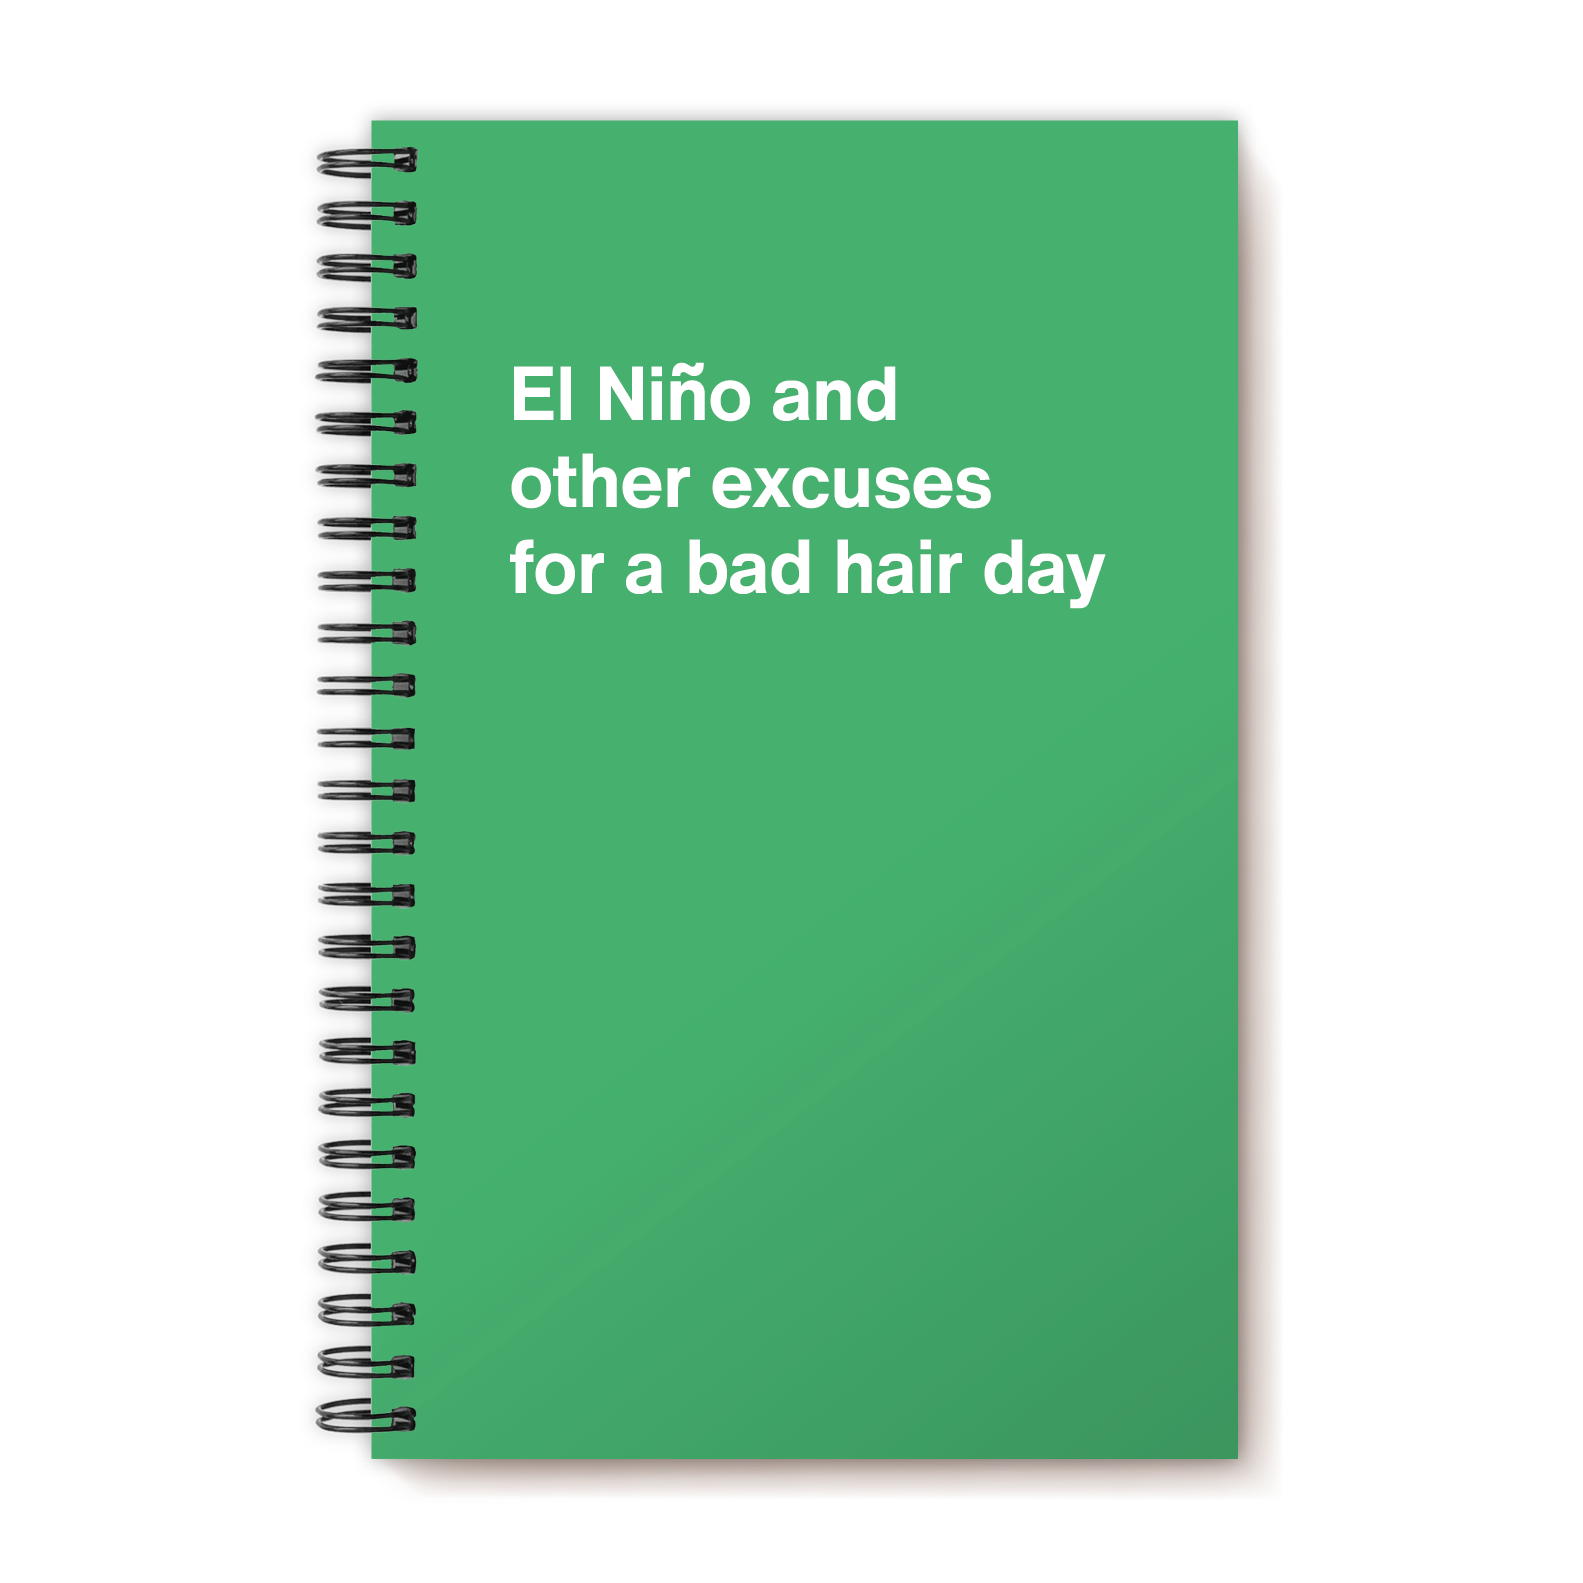 El Niño and other excuses for a bad hair day